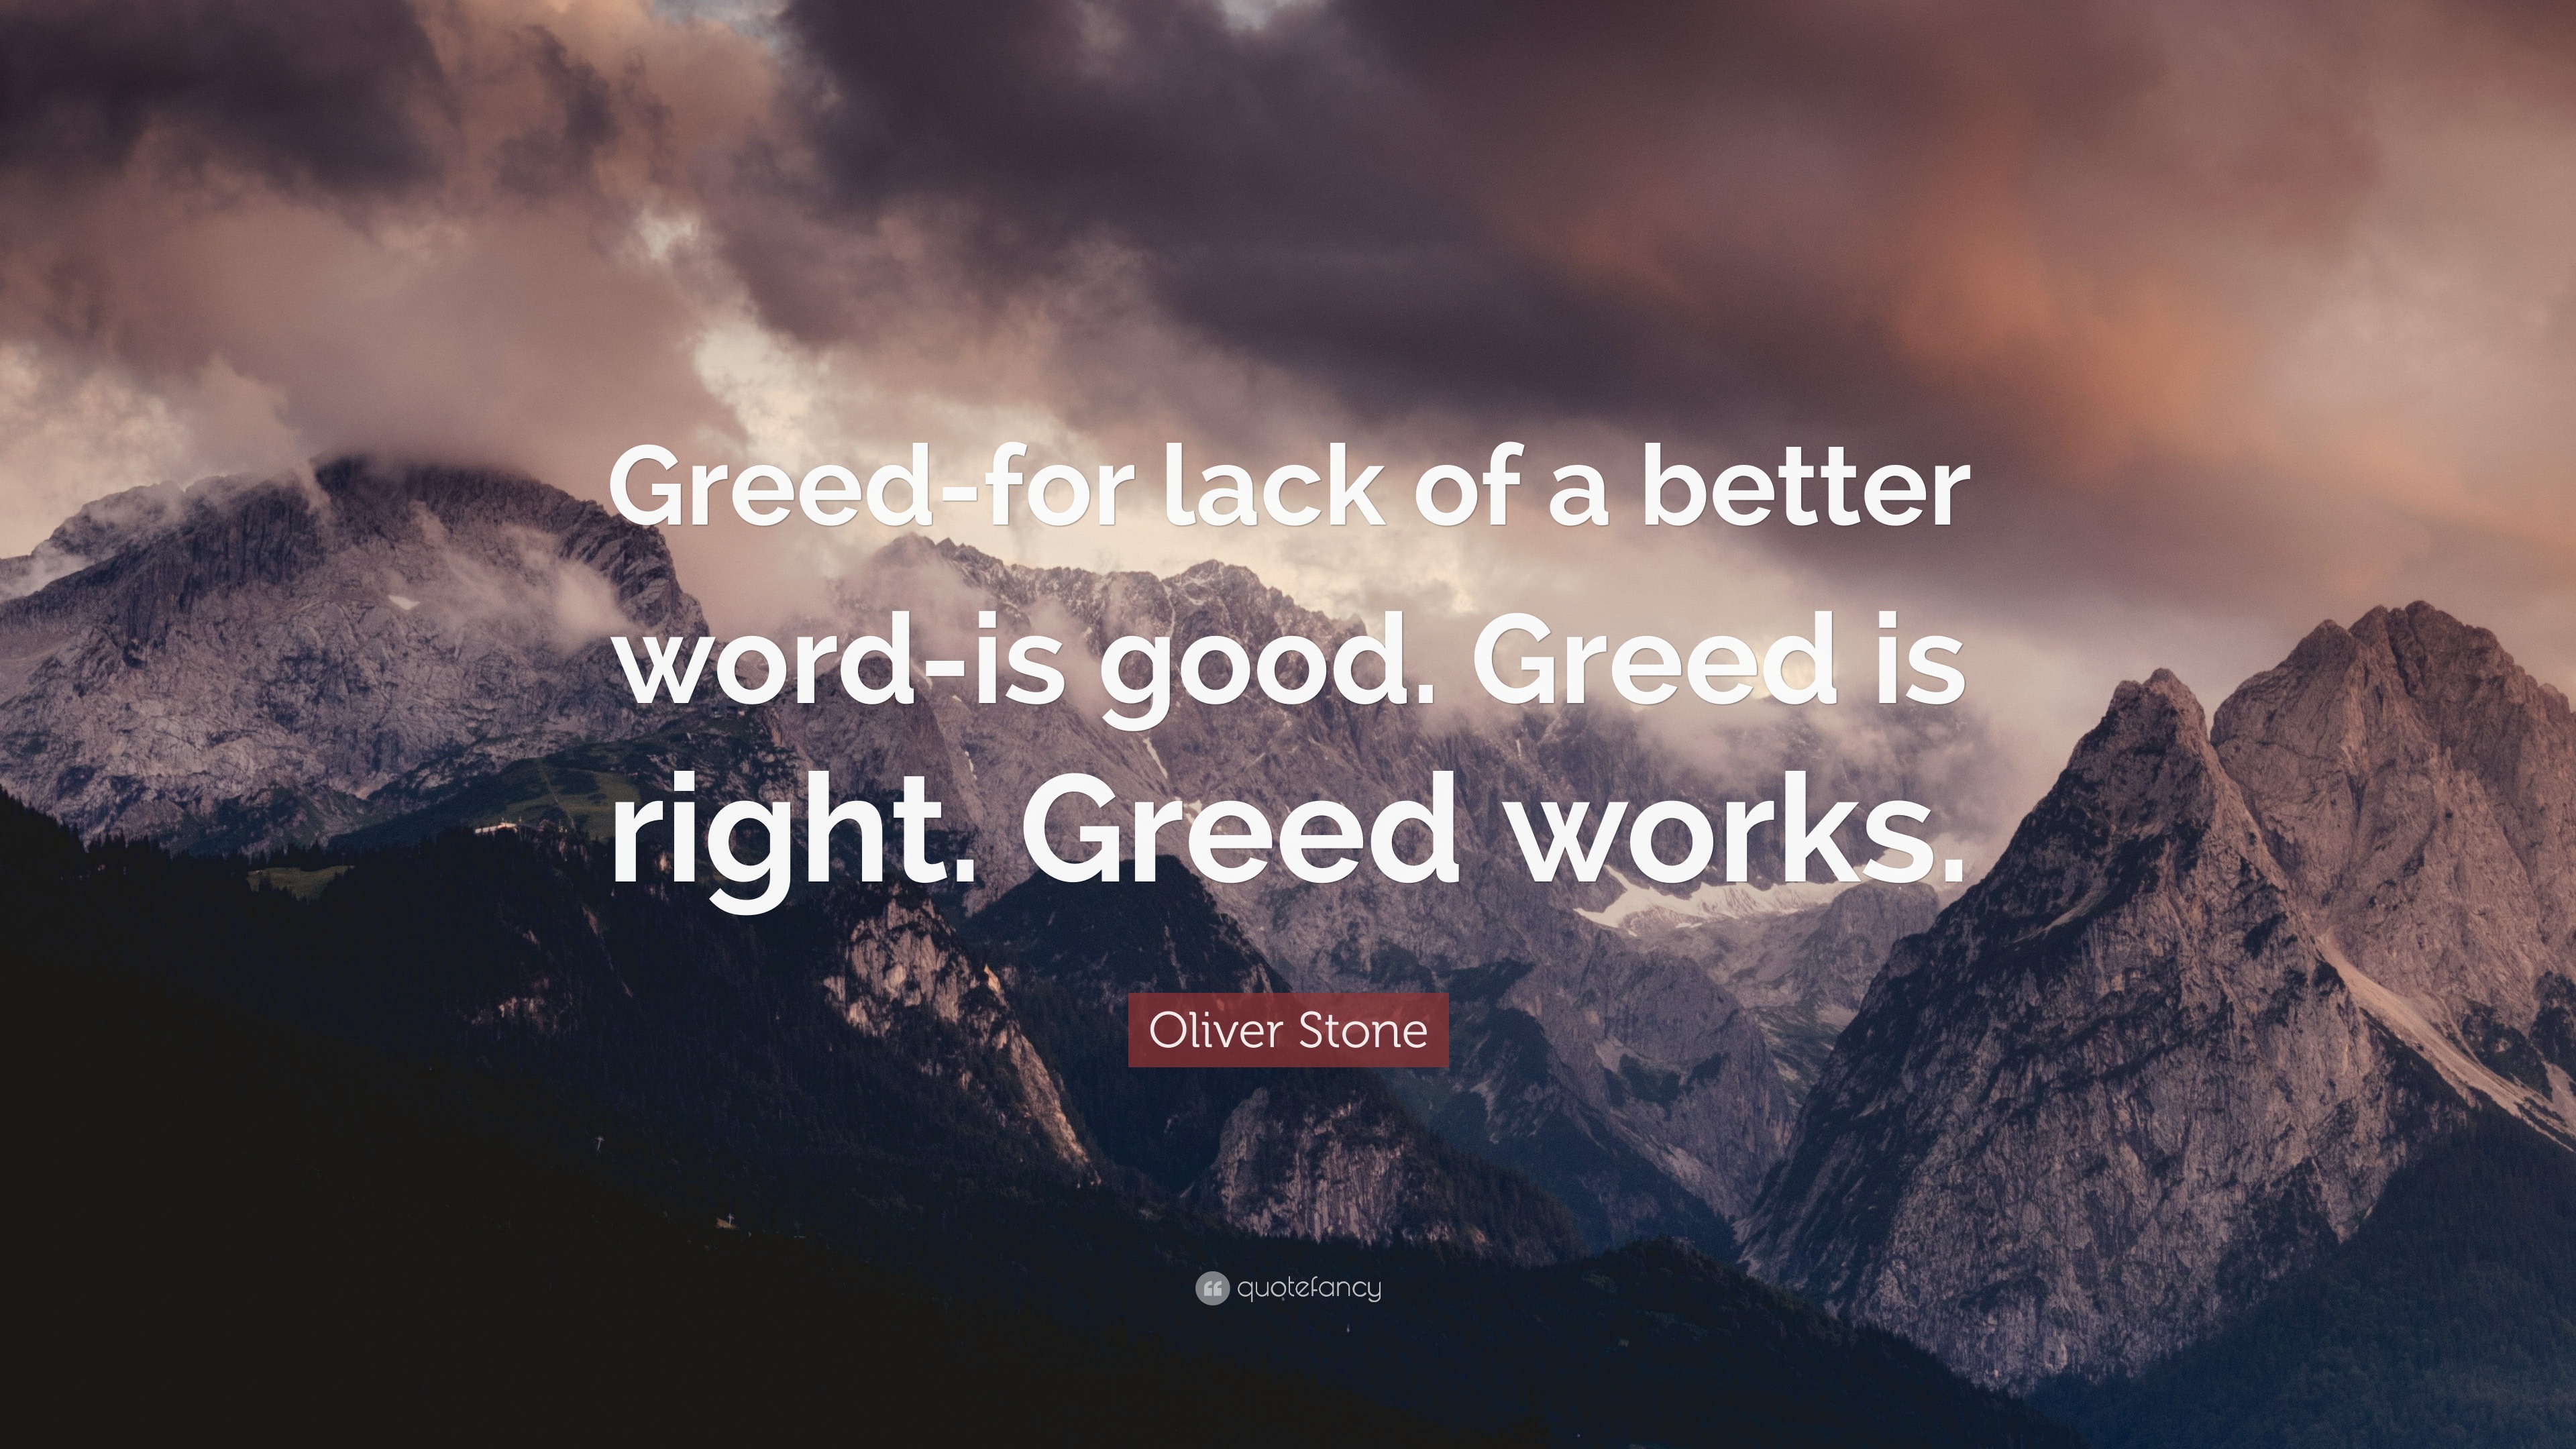 Greed Quotes - WonderfulQuote